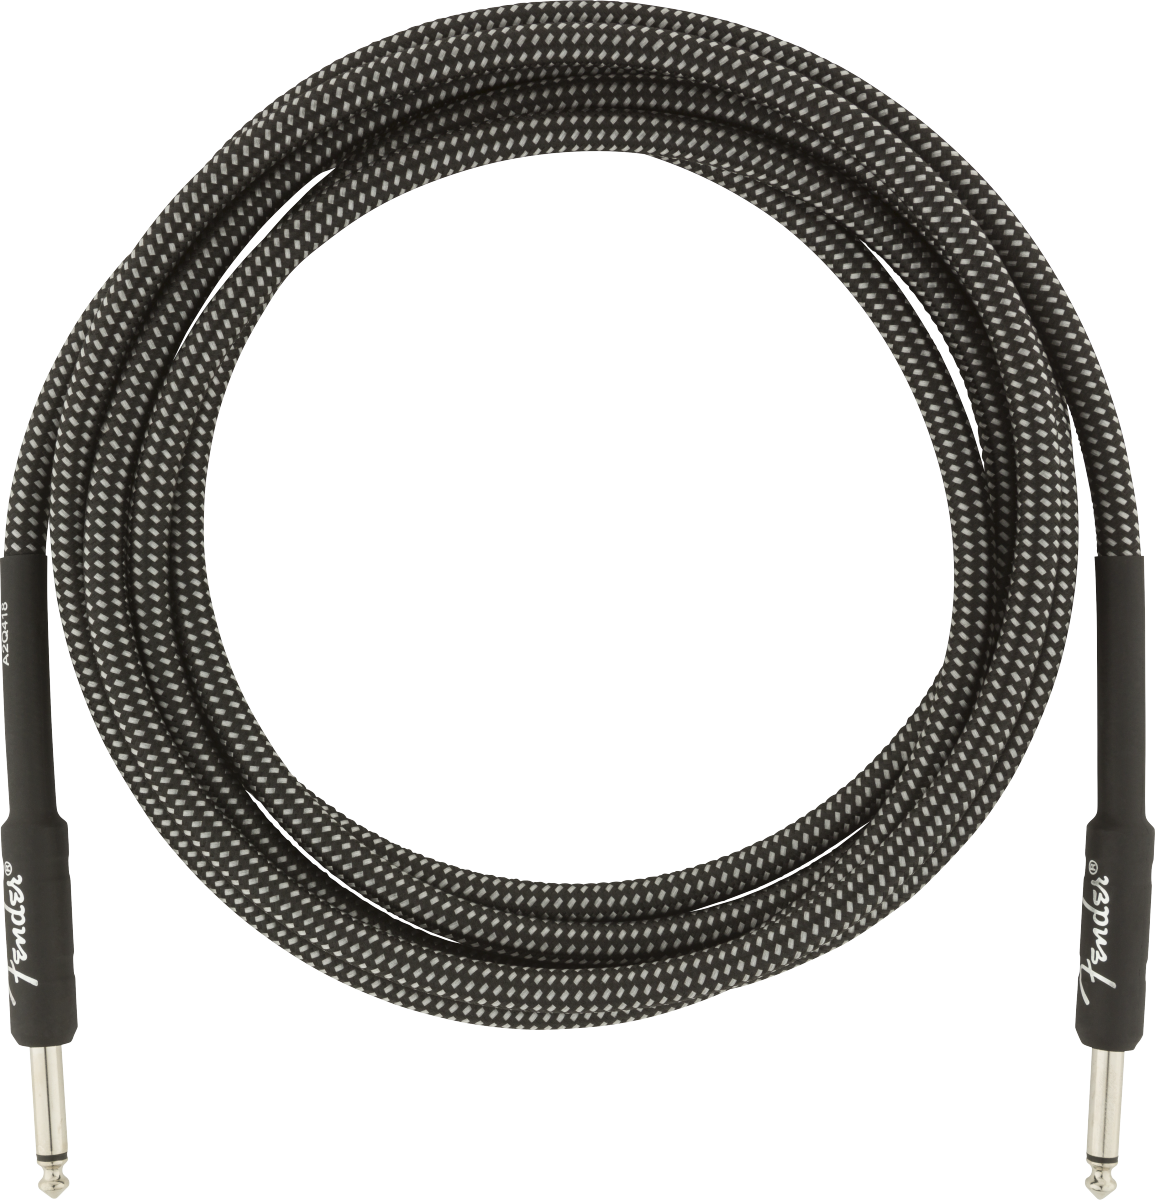 FENDER Professional Series Instrument Cables, 10', Gray Tweed (0990820062)